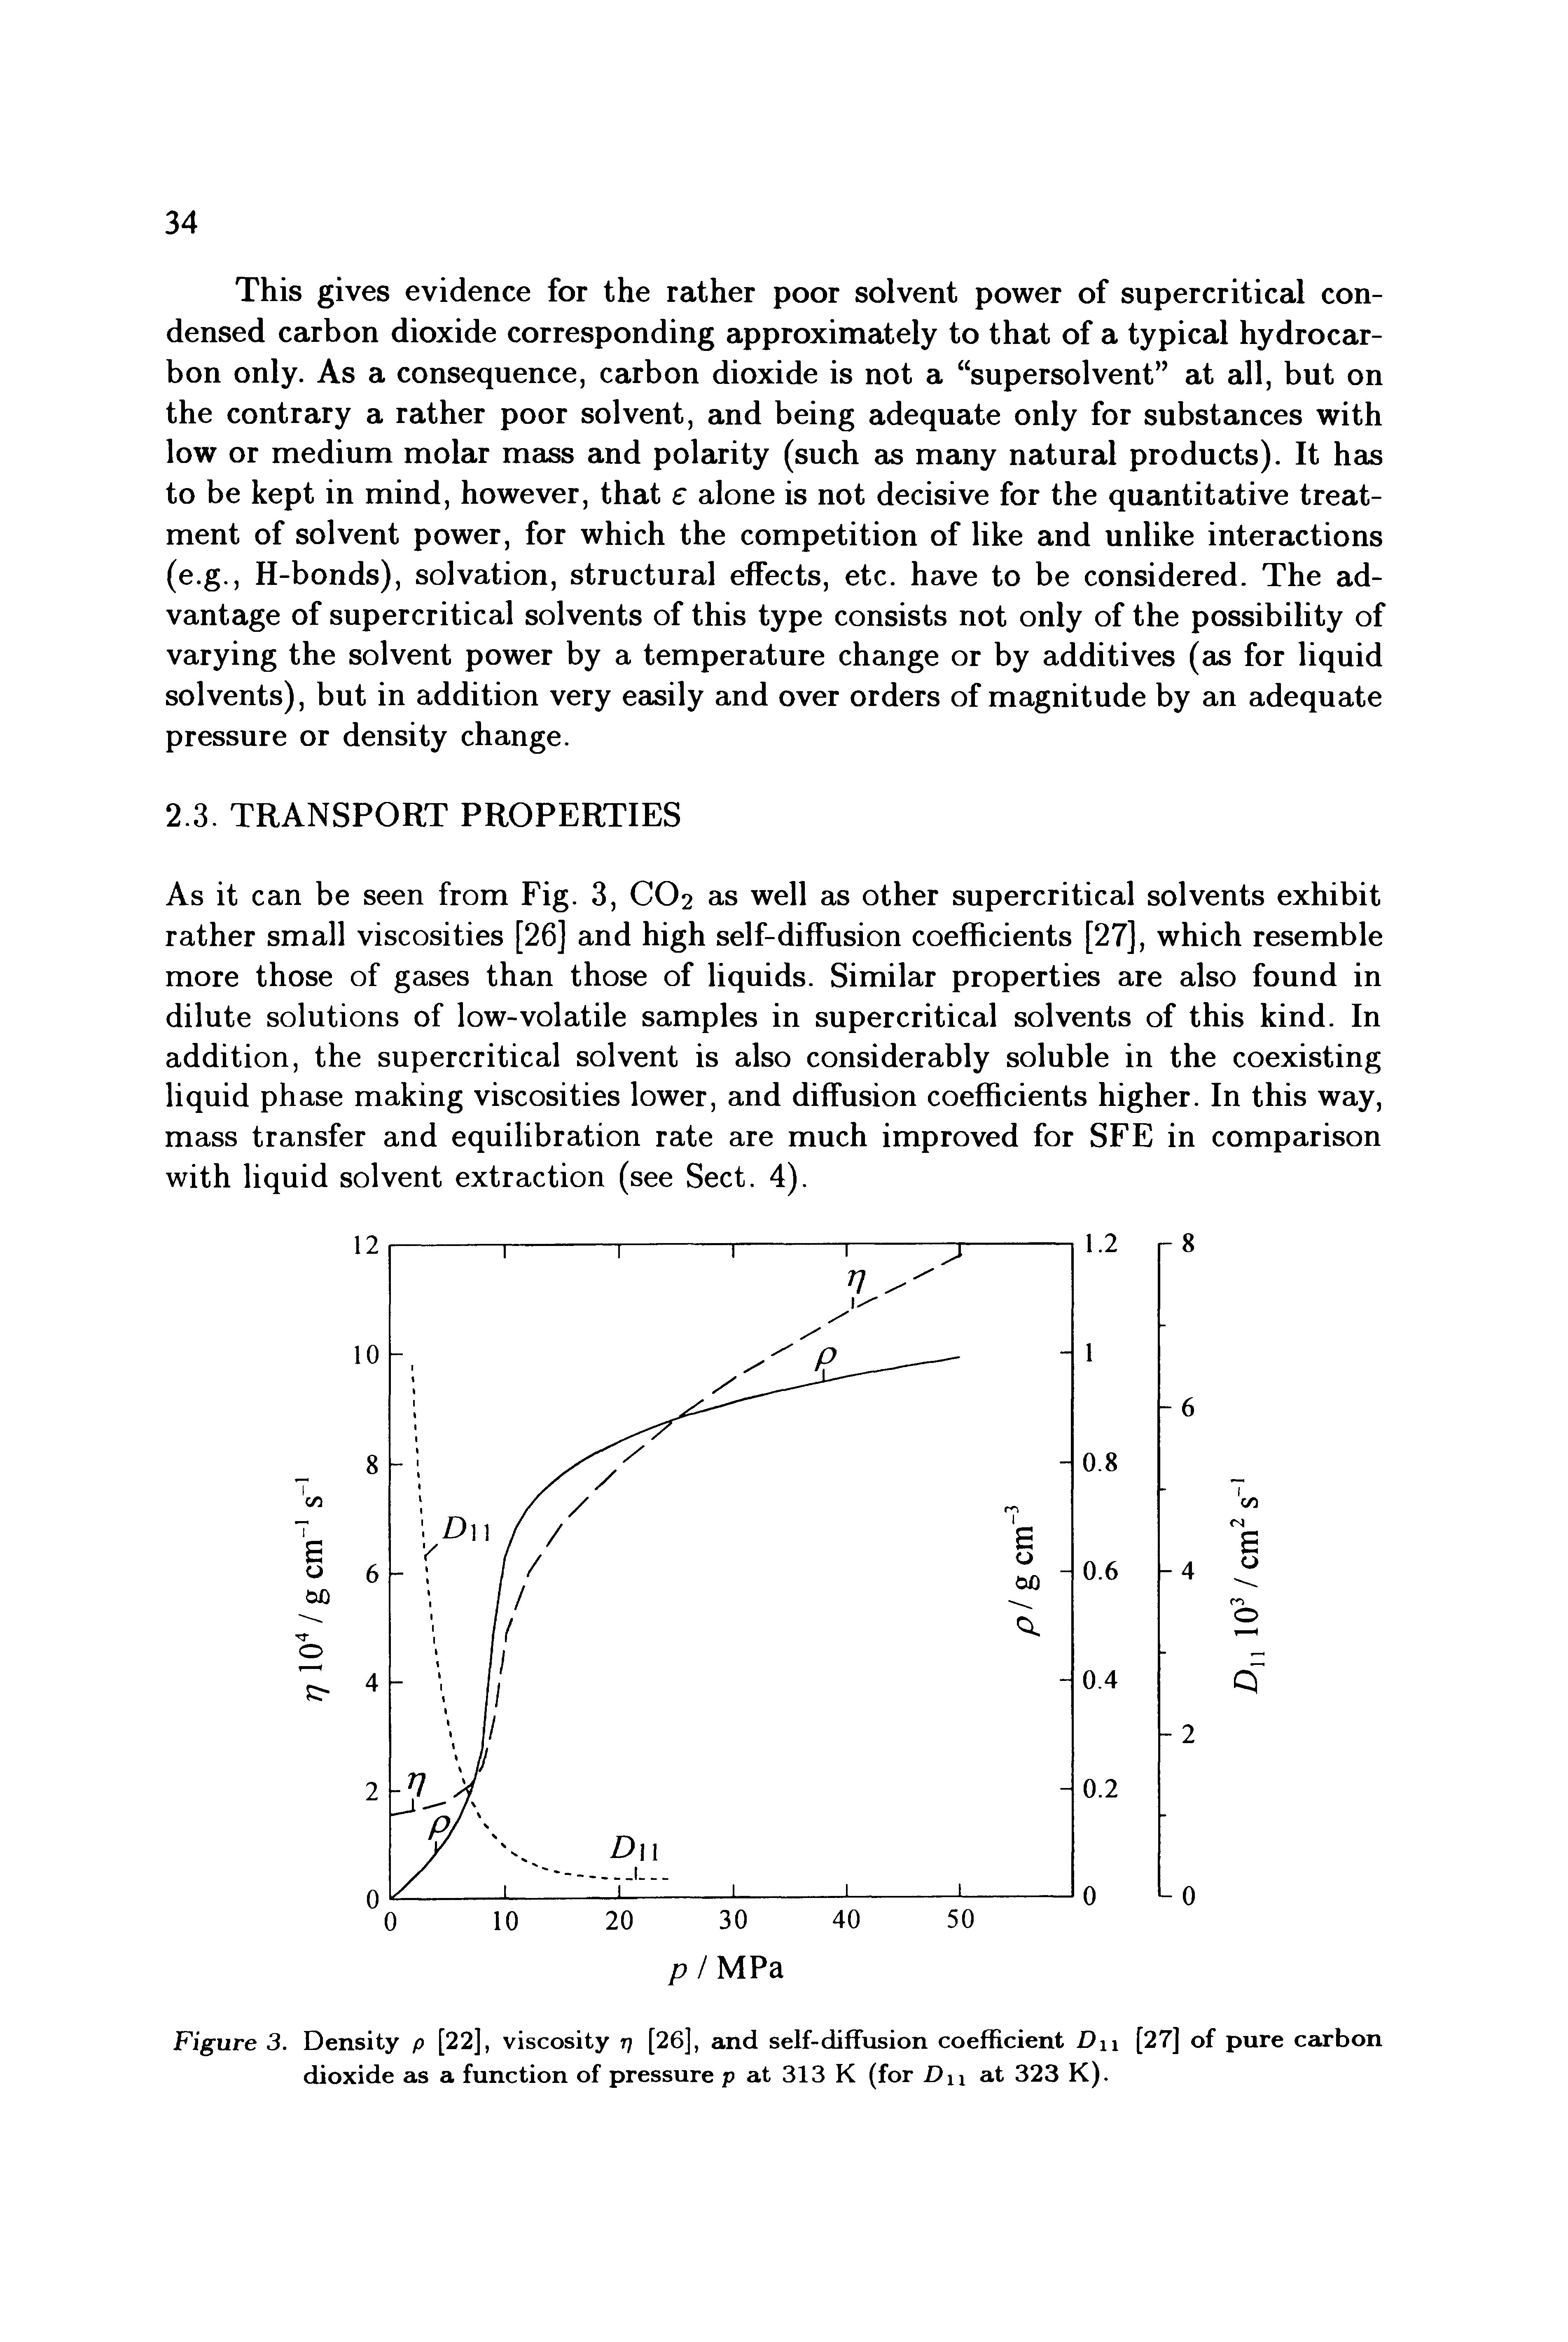 Figure 3. Density p [22], viscosity 77 [26], and self-diffusion coefficient D [27] of pure carbon dioxide as a function of pressure p at 313 K (for Du at 323 K).